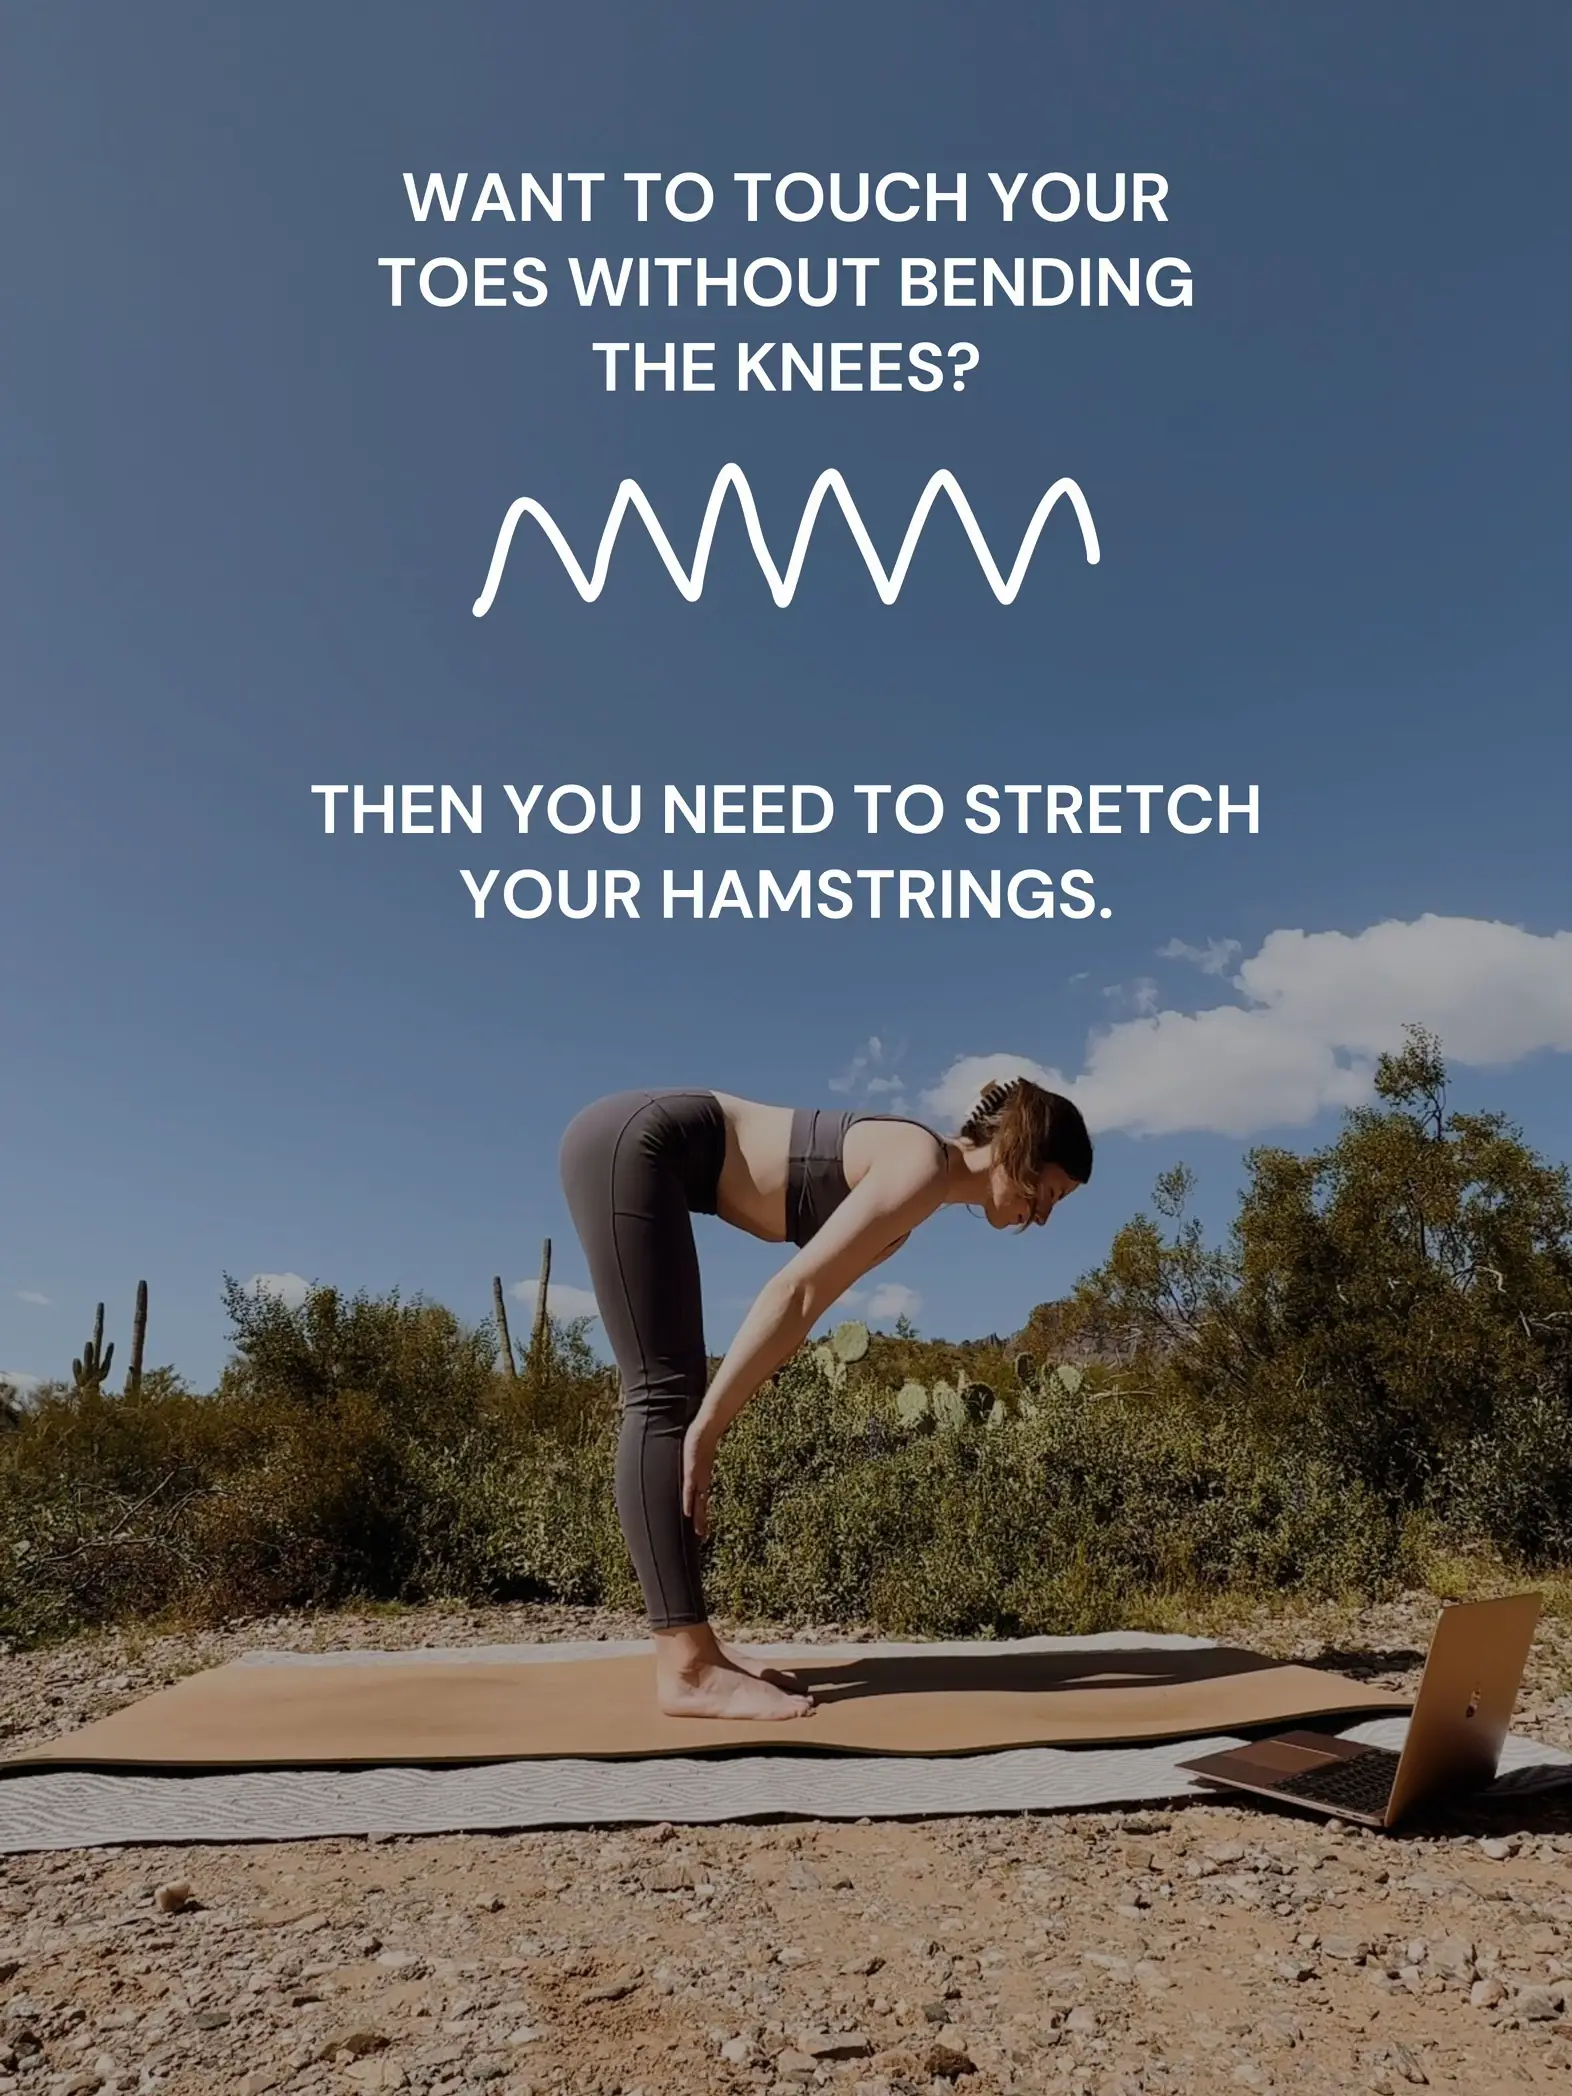 Yoga poses to help you touch your toes